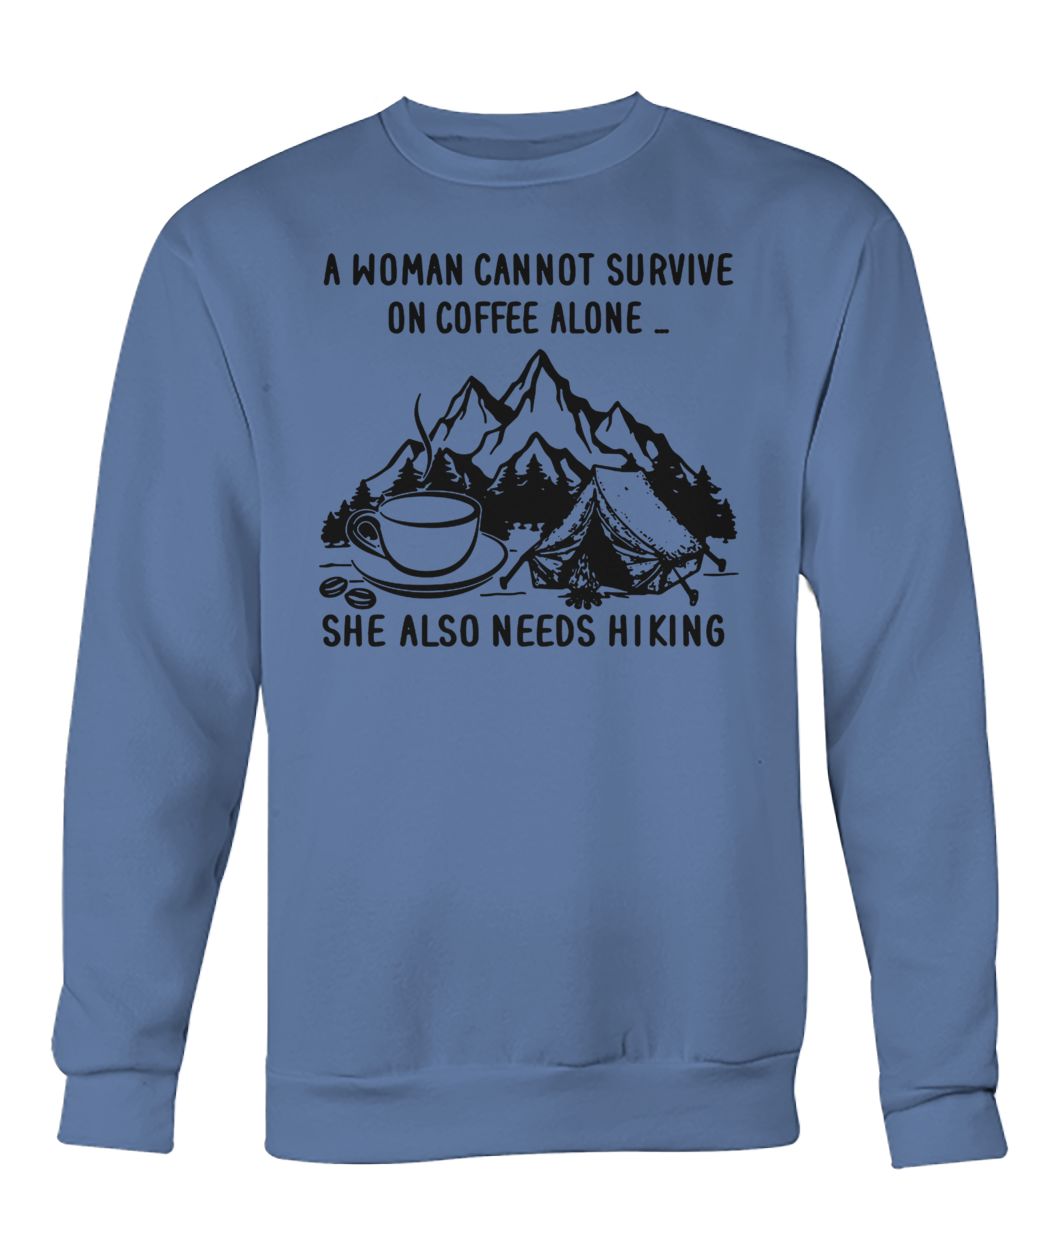 A woman cannot survive on coffee alone she also needs hiking crew neck sweatshirt